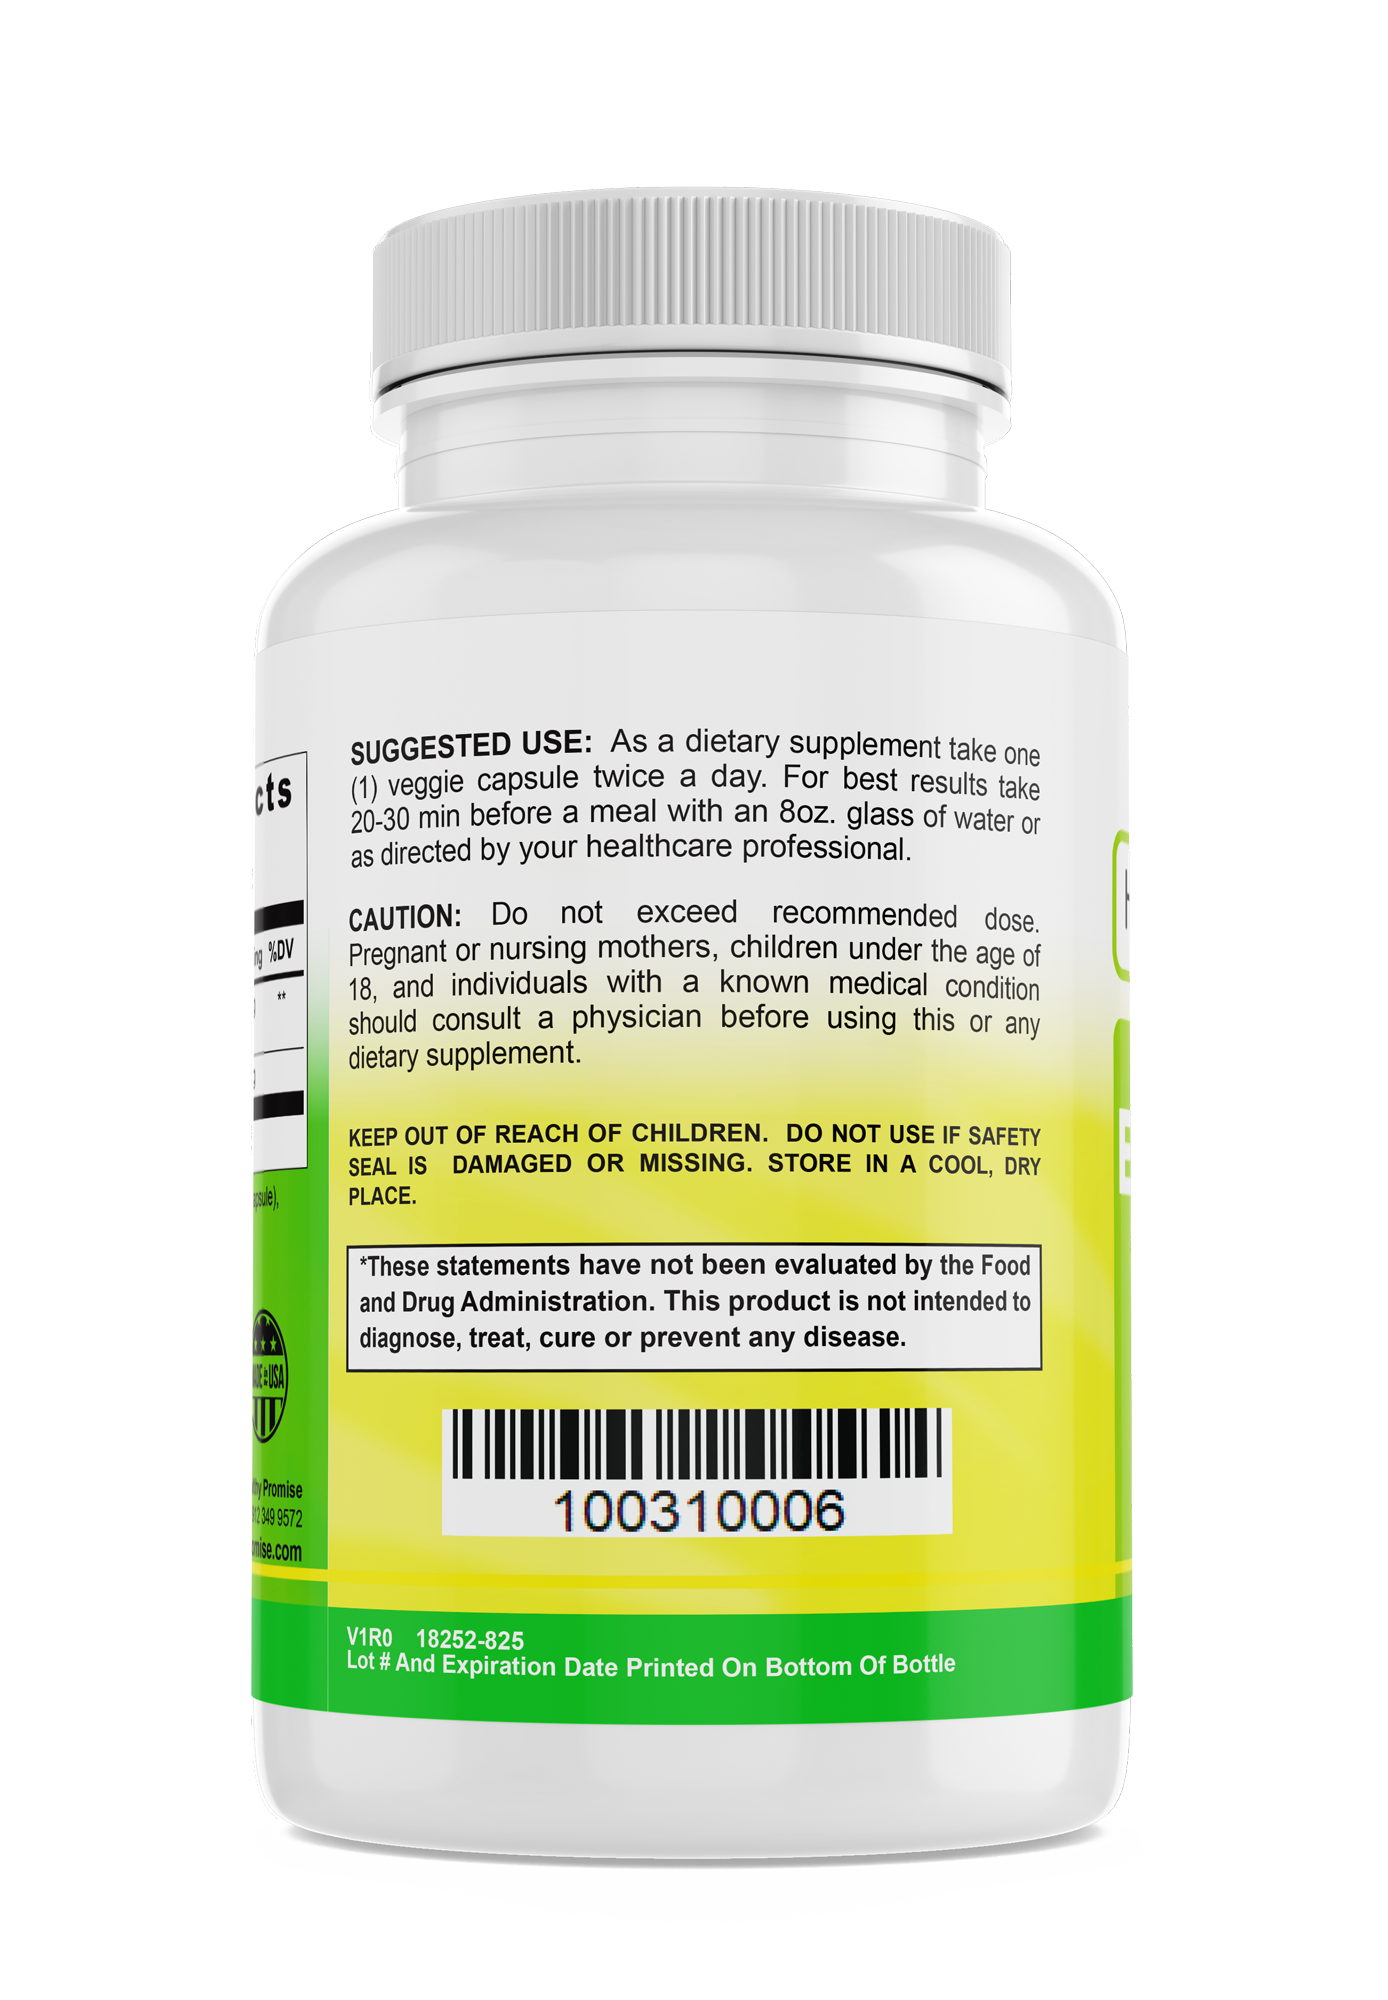 the healthy promise elderberry dietary vitamin supplement bottle suggested use